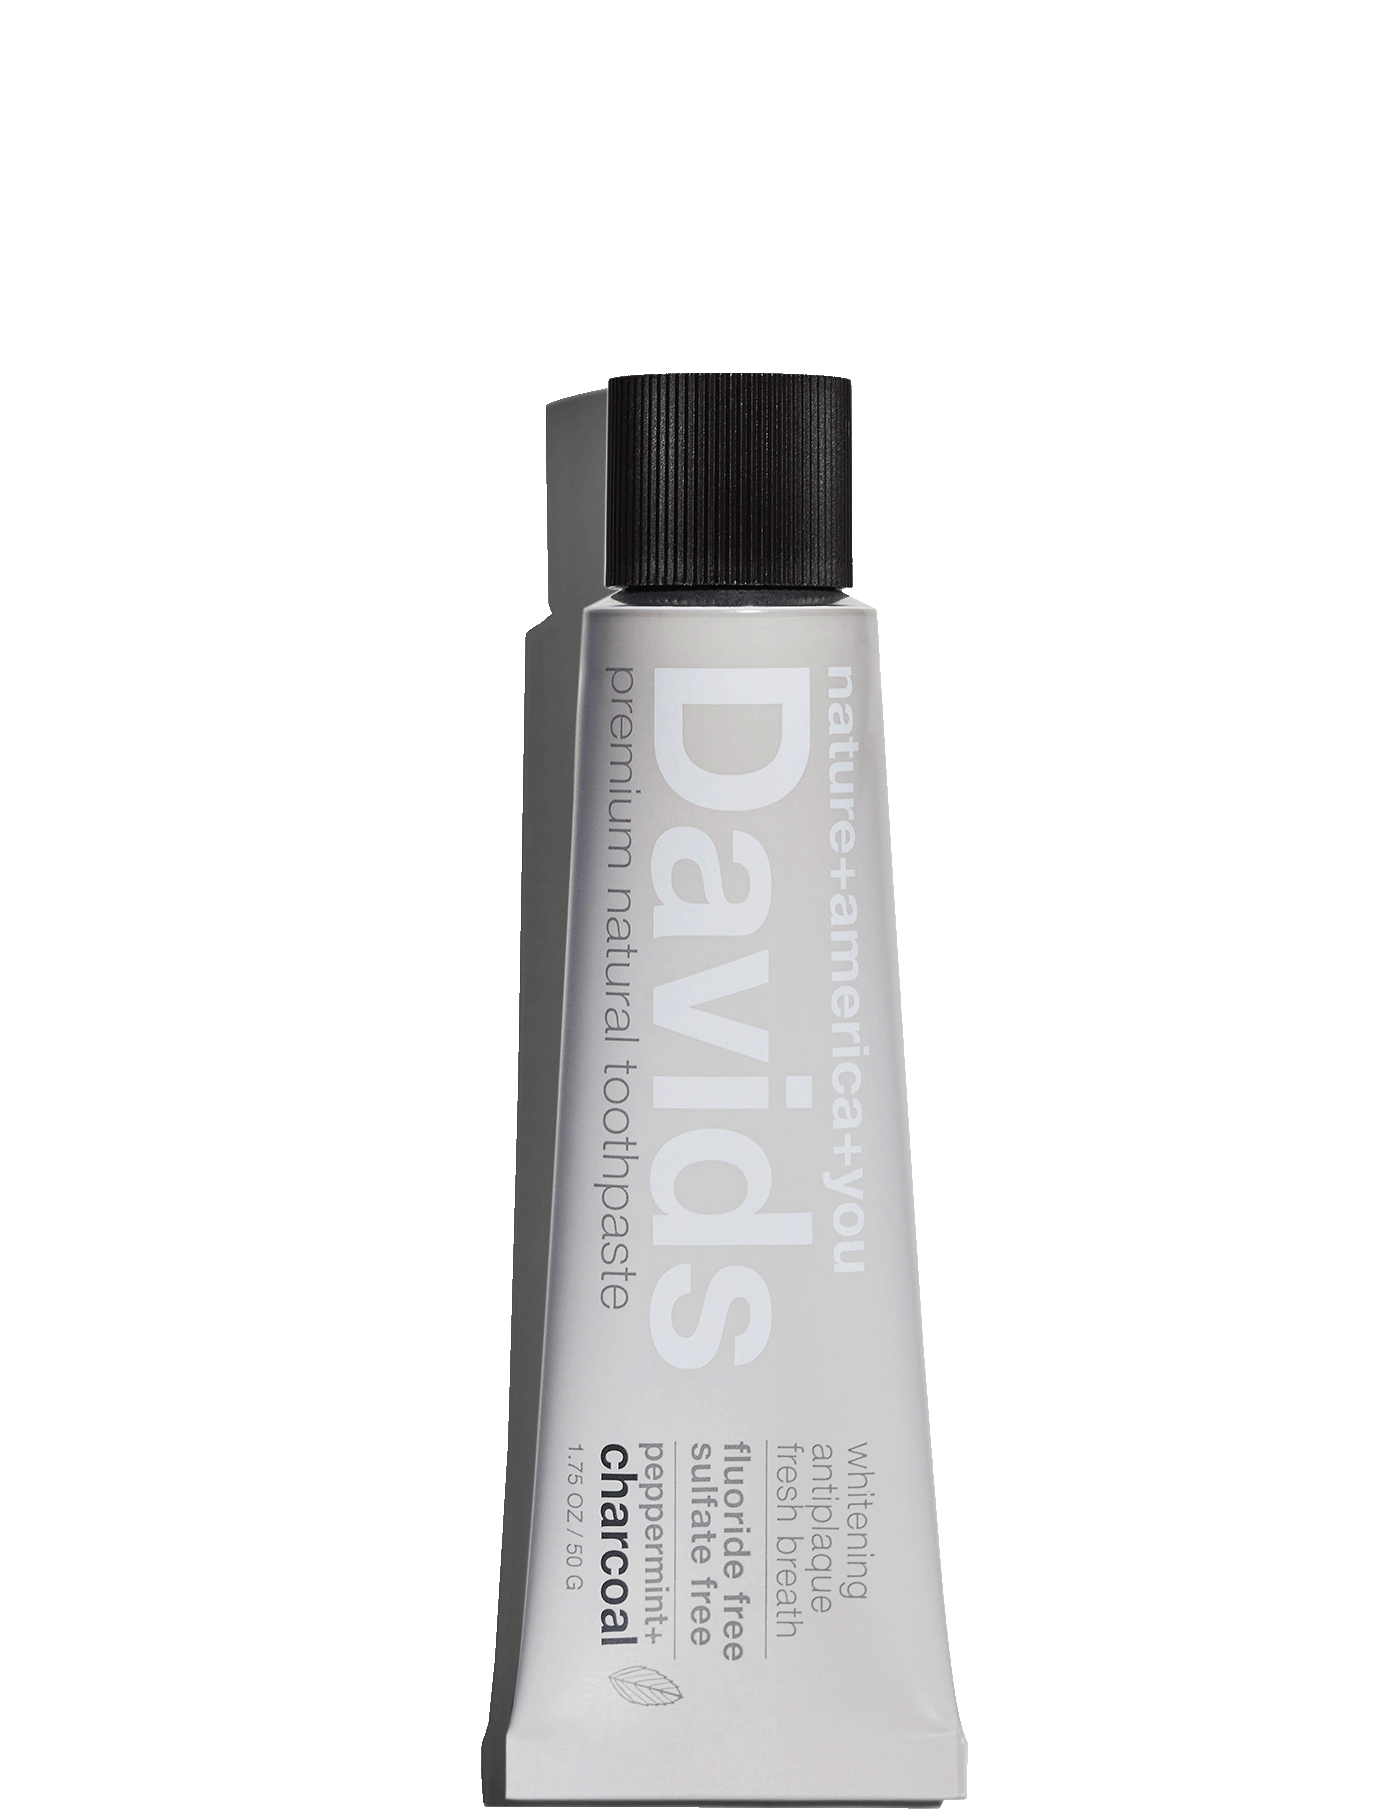 Davids travel size premium toothpaste  /  charcoal+peppermint